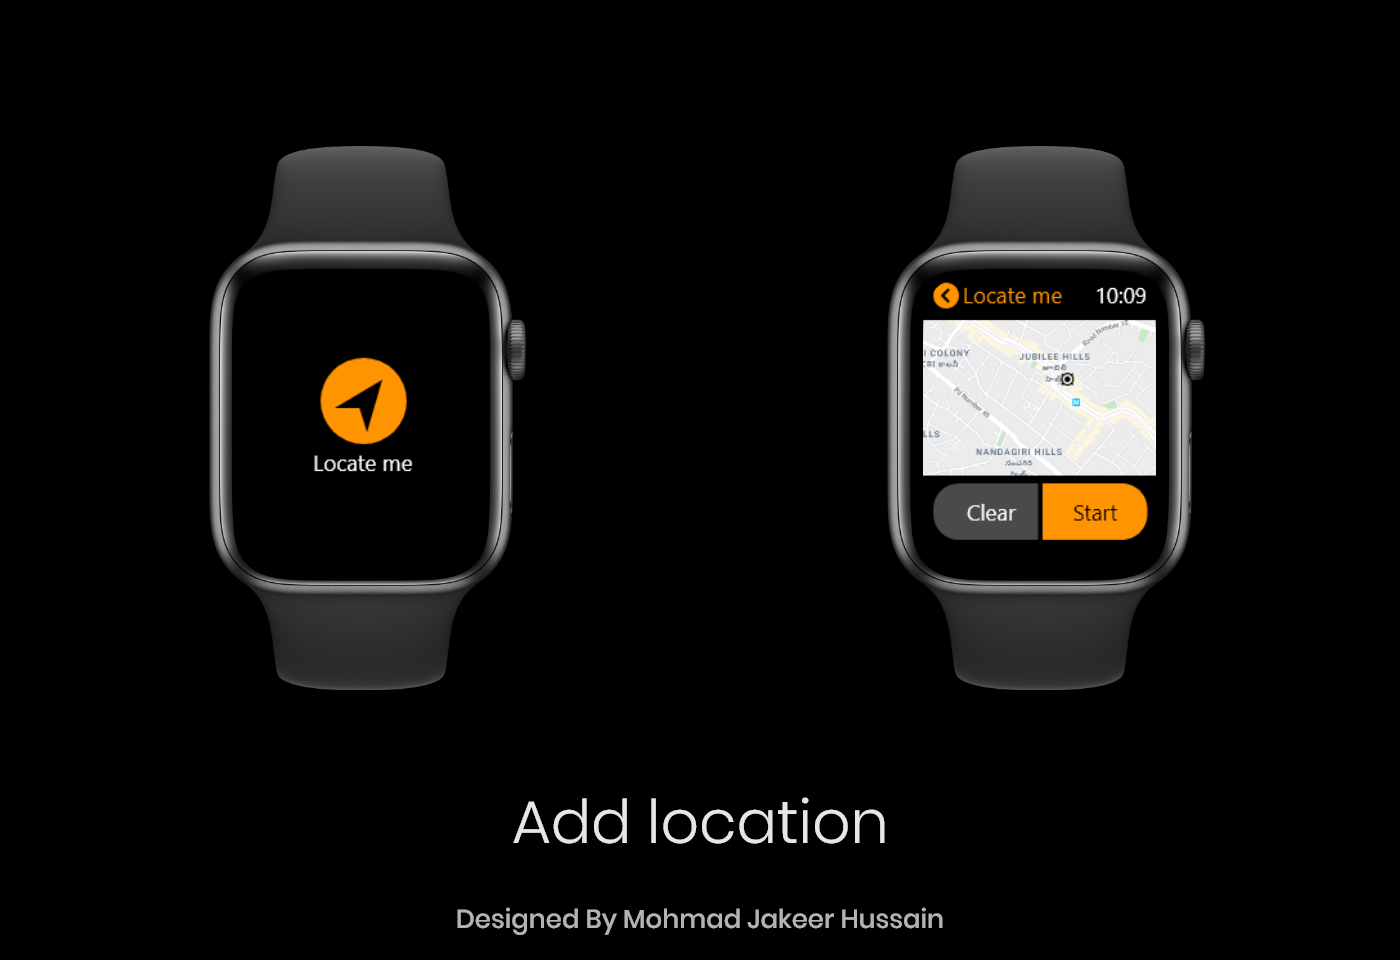 Smart Chef Scale Apple Watch Integration for speedy food tracking